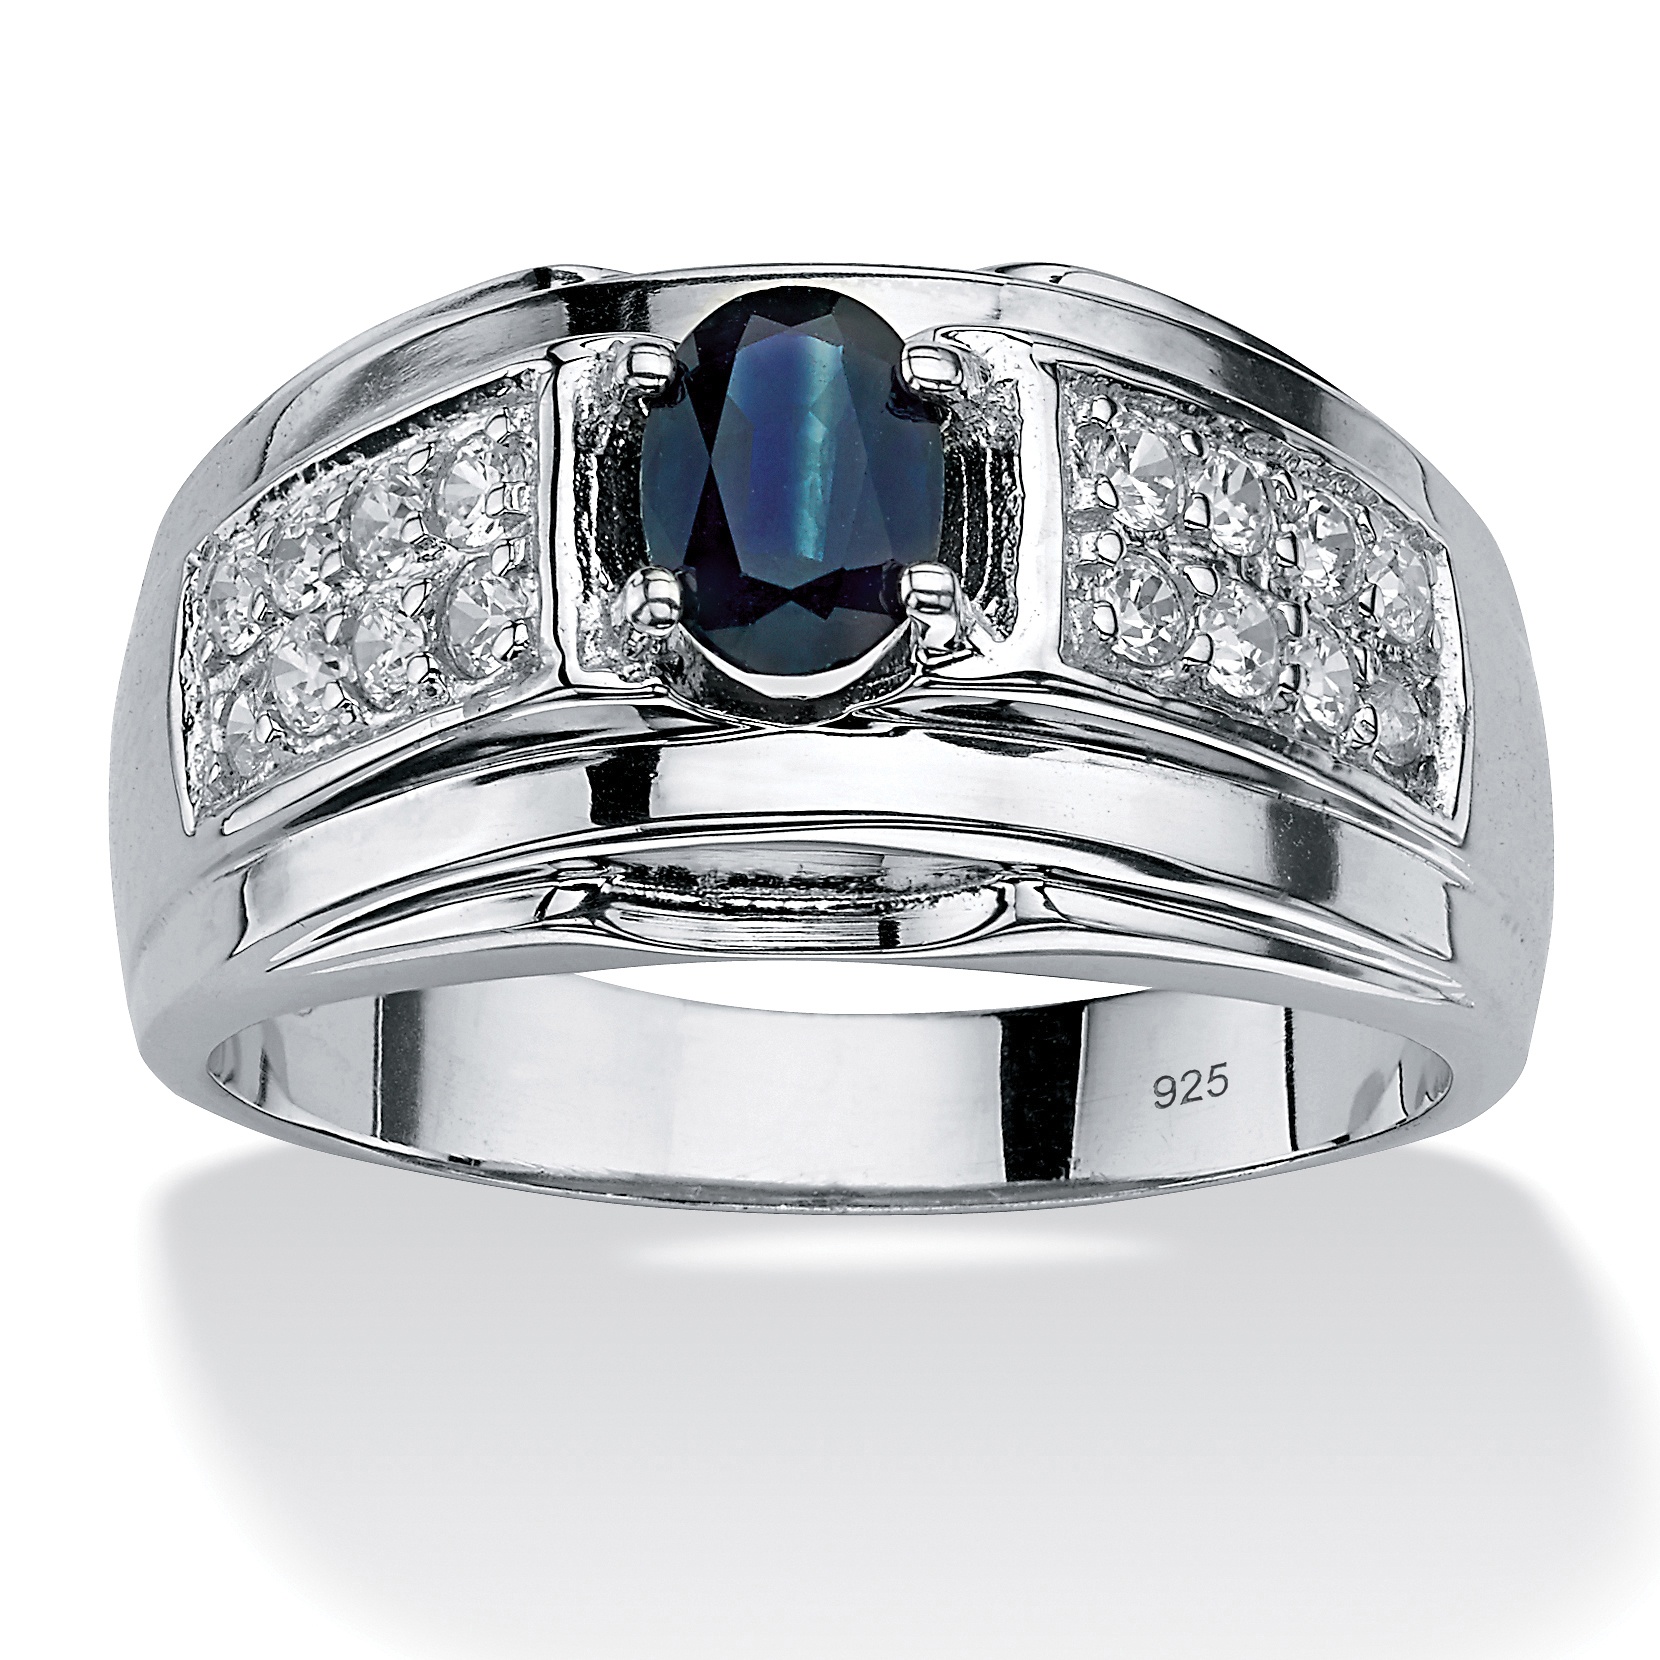 Men's 1.53 TCW Oval-Cut Genuine Midnight Blue Sapphire and Cubic ...